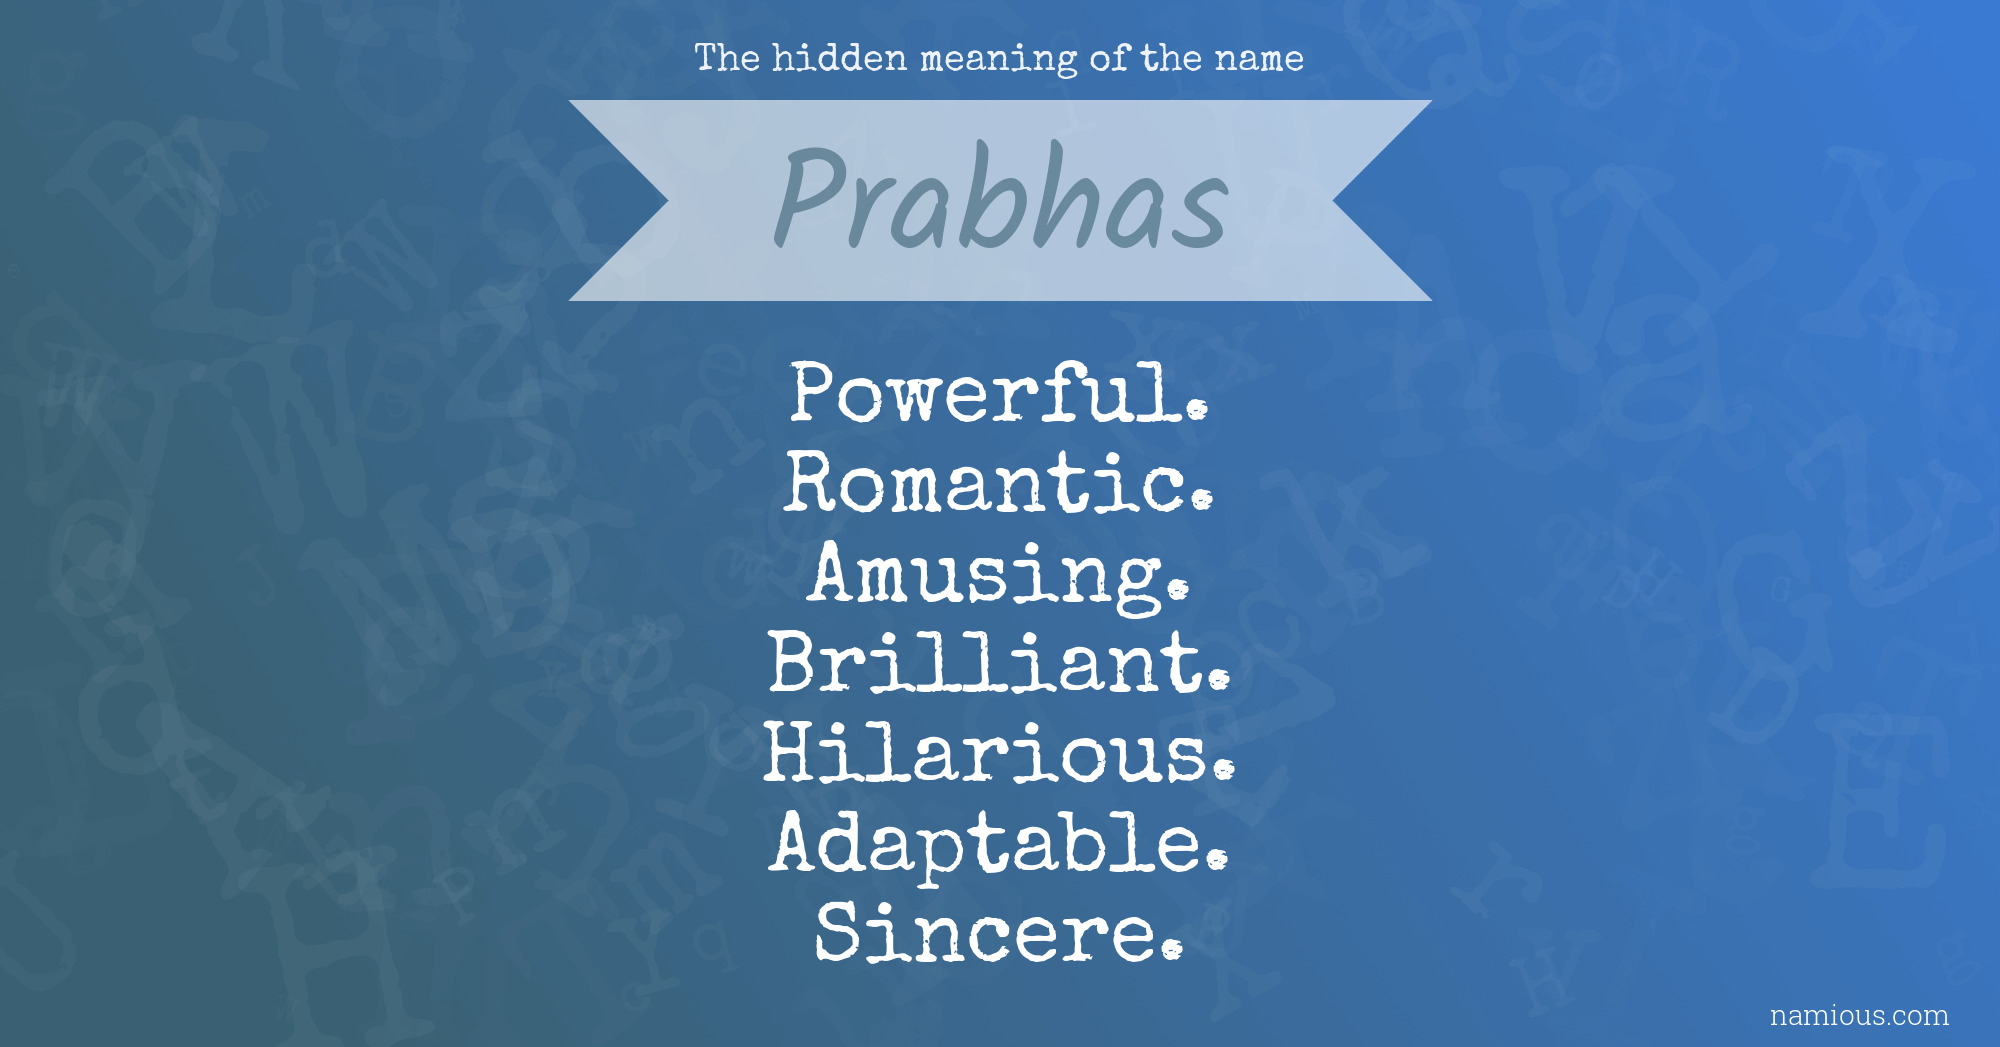 The hidden meaning of the name Prabhas